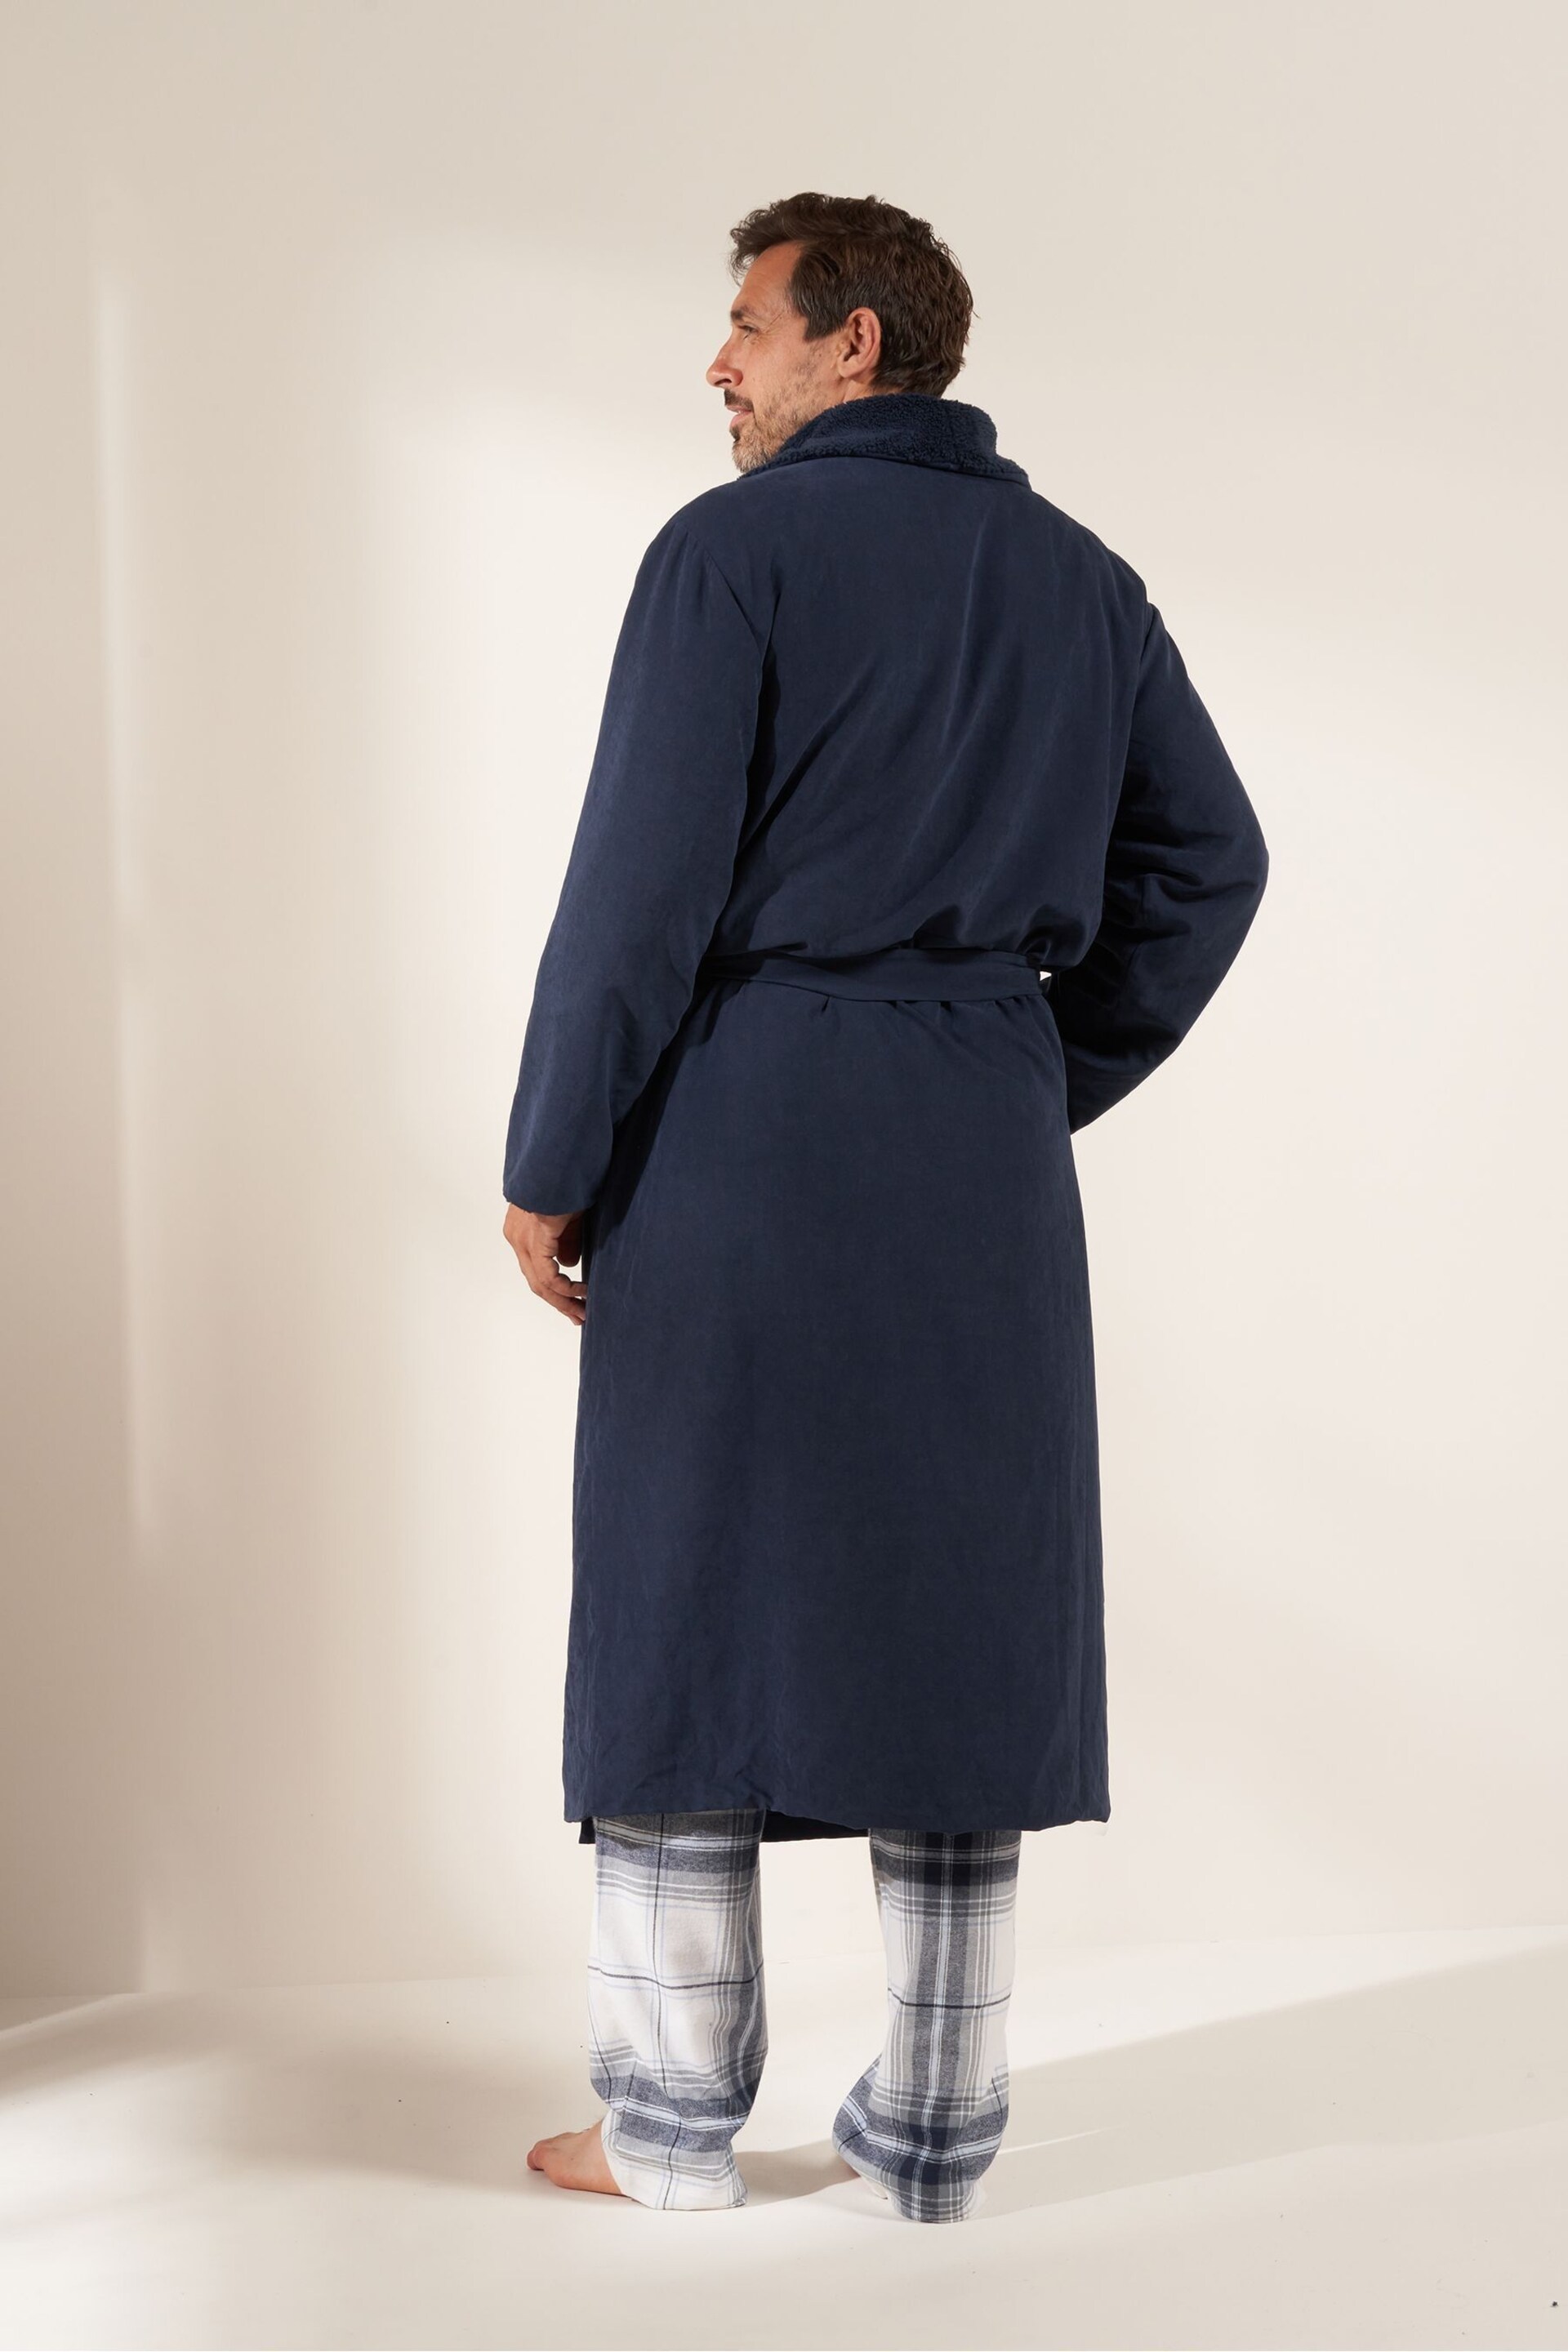 Truly Navy Blue Fleece Dressing Gown - Image 2 of 4